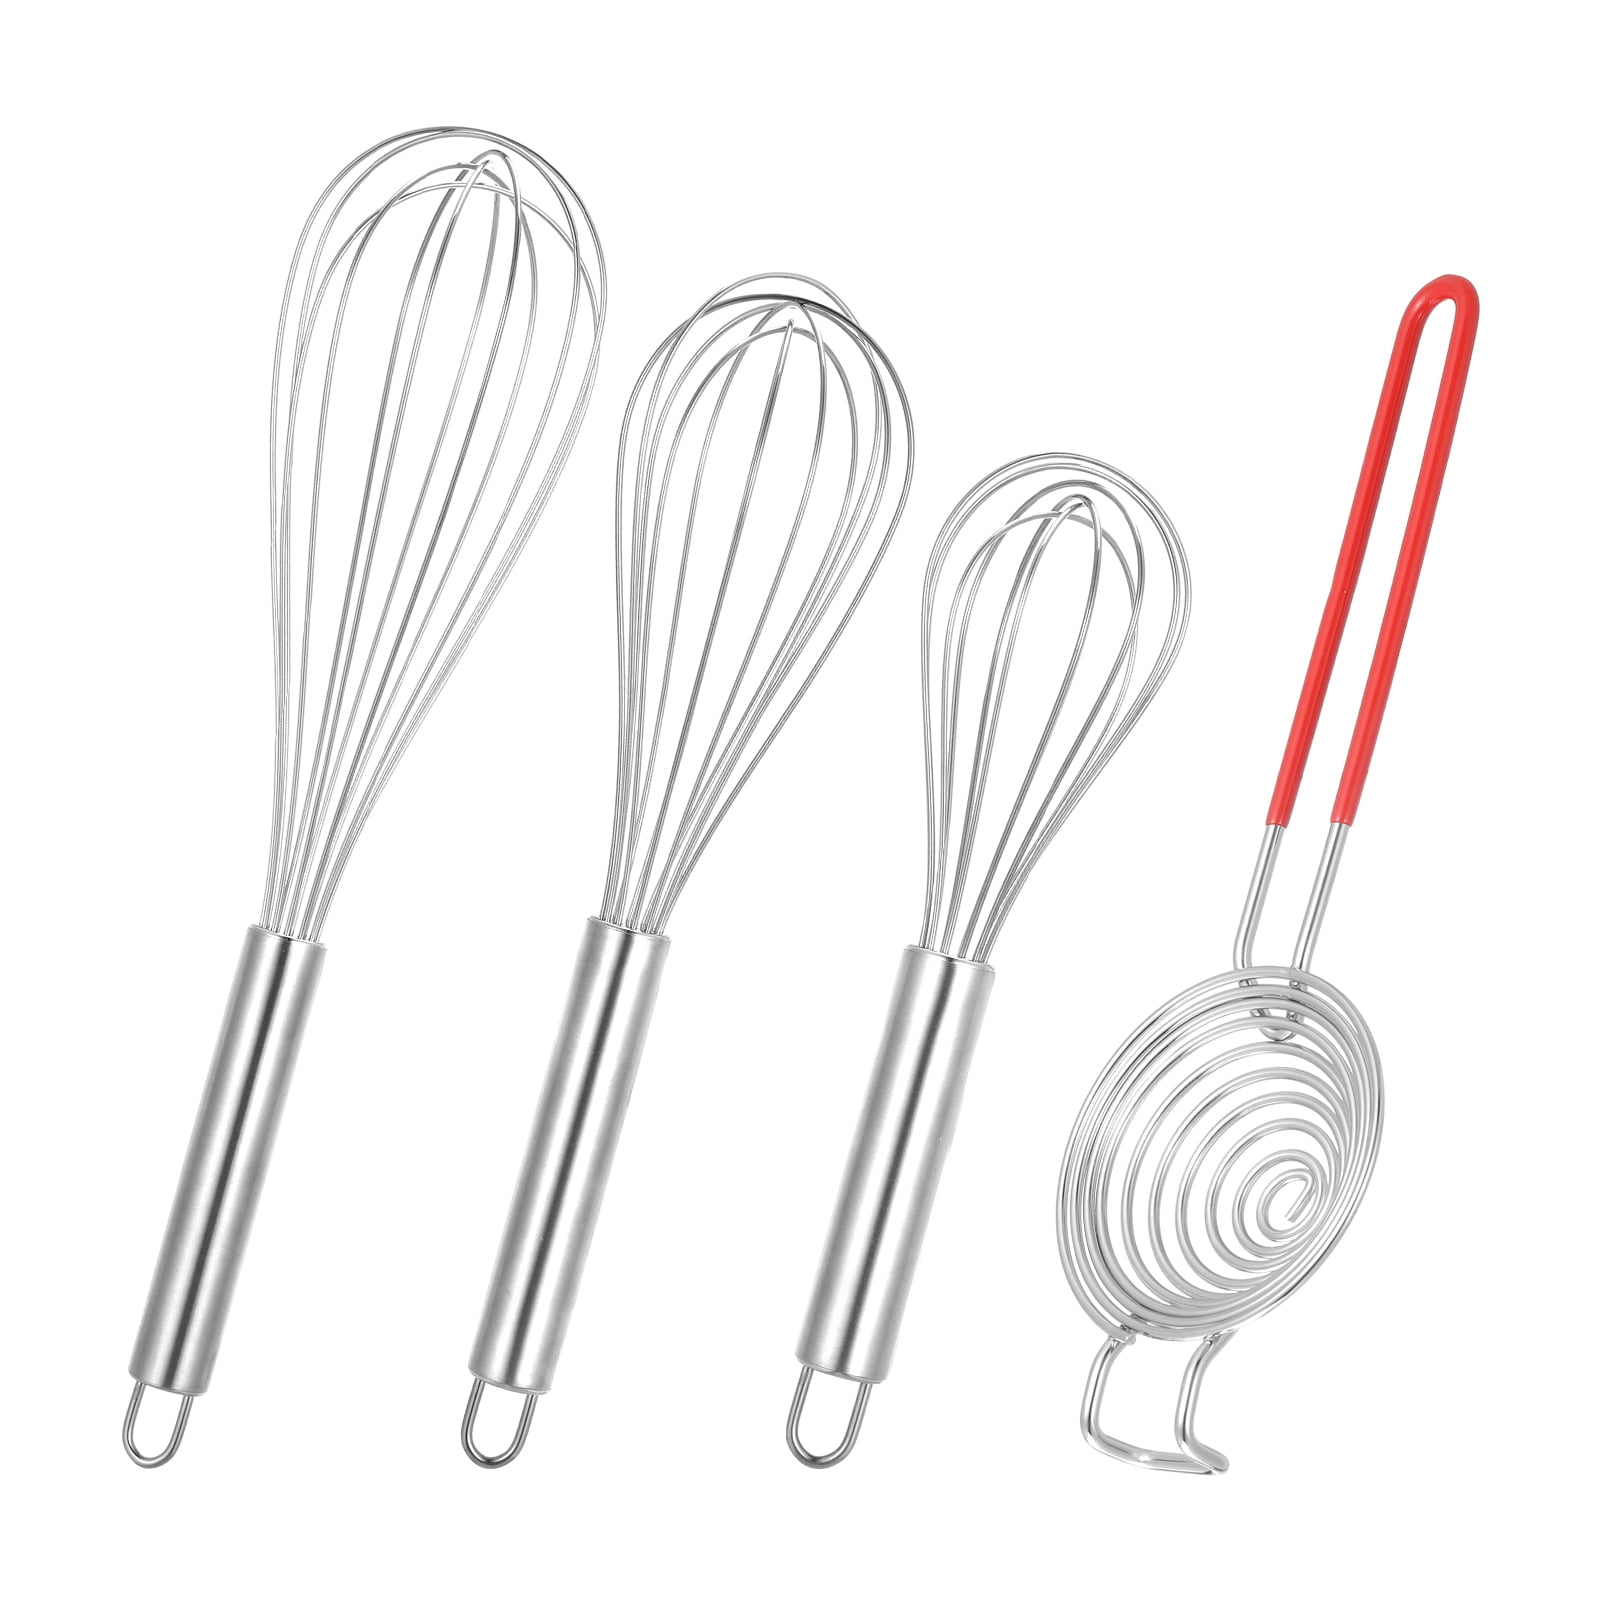 Japan Easy To Clean Whisk Wire Egg Whisk Stick Kitchen Whisks for Cooking  Blending Whisking Beating Egg Mixer Baking Tool NEW - AliExpress